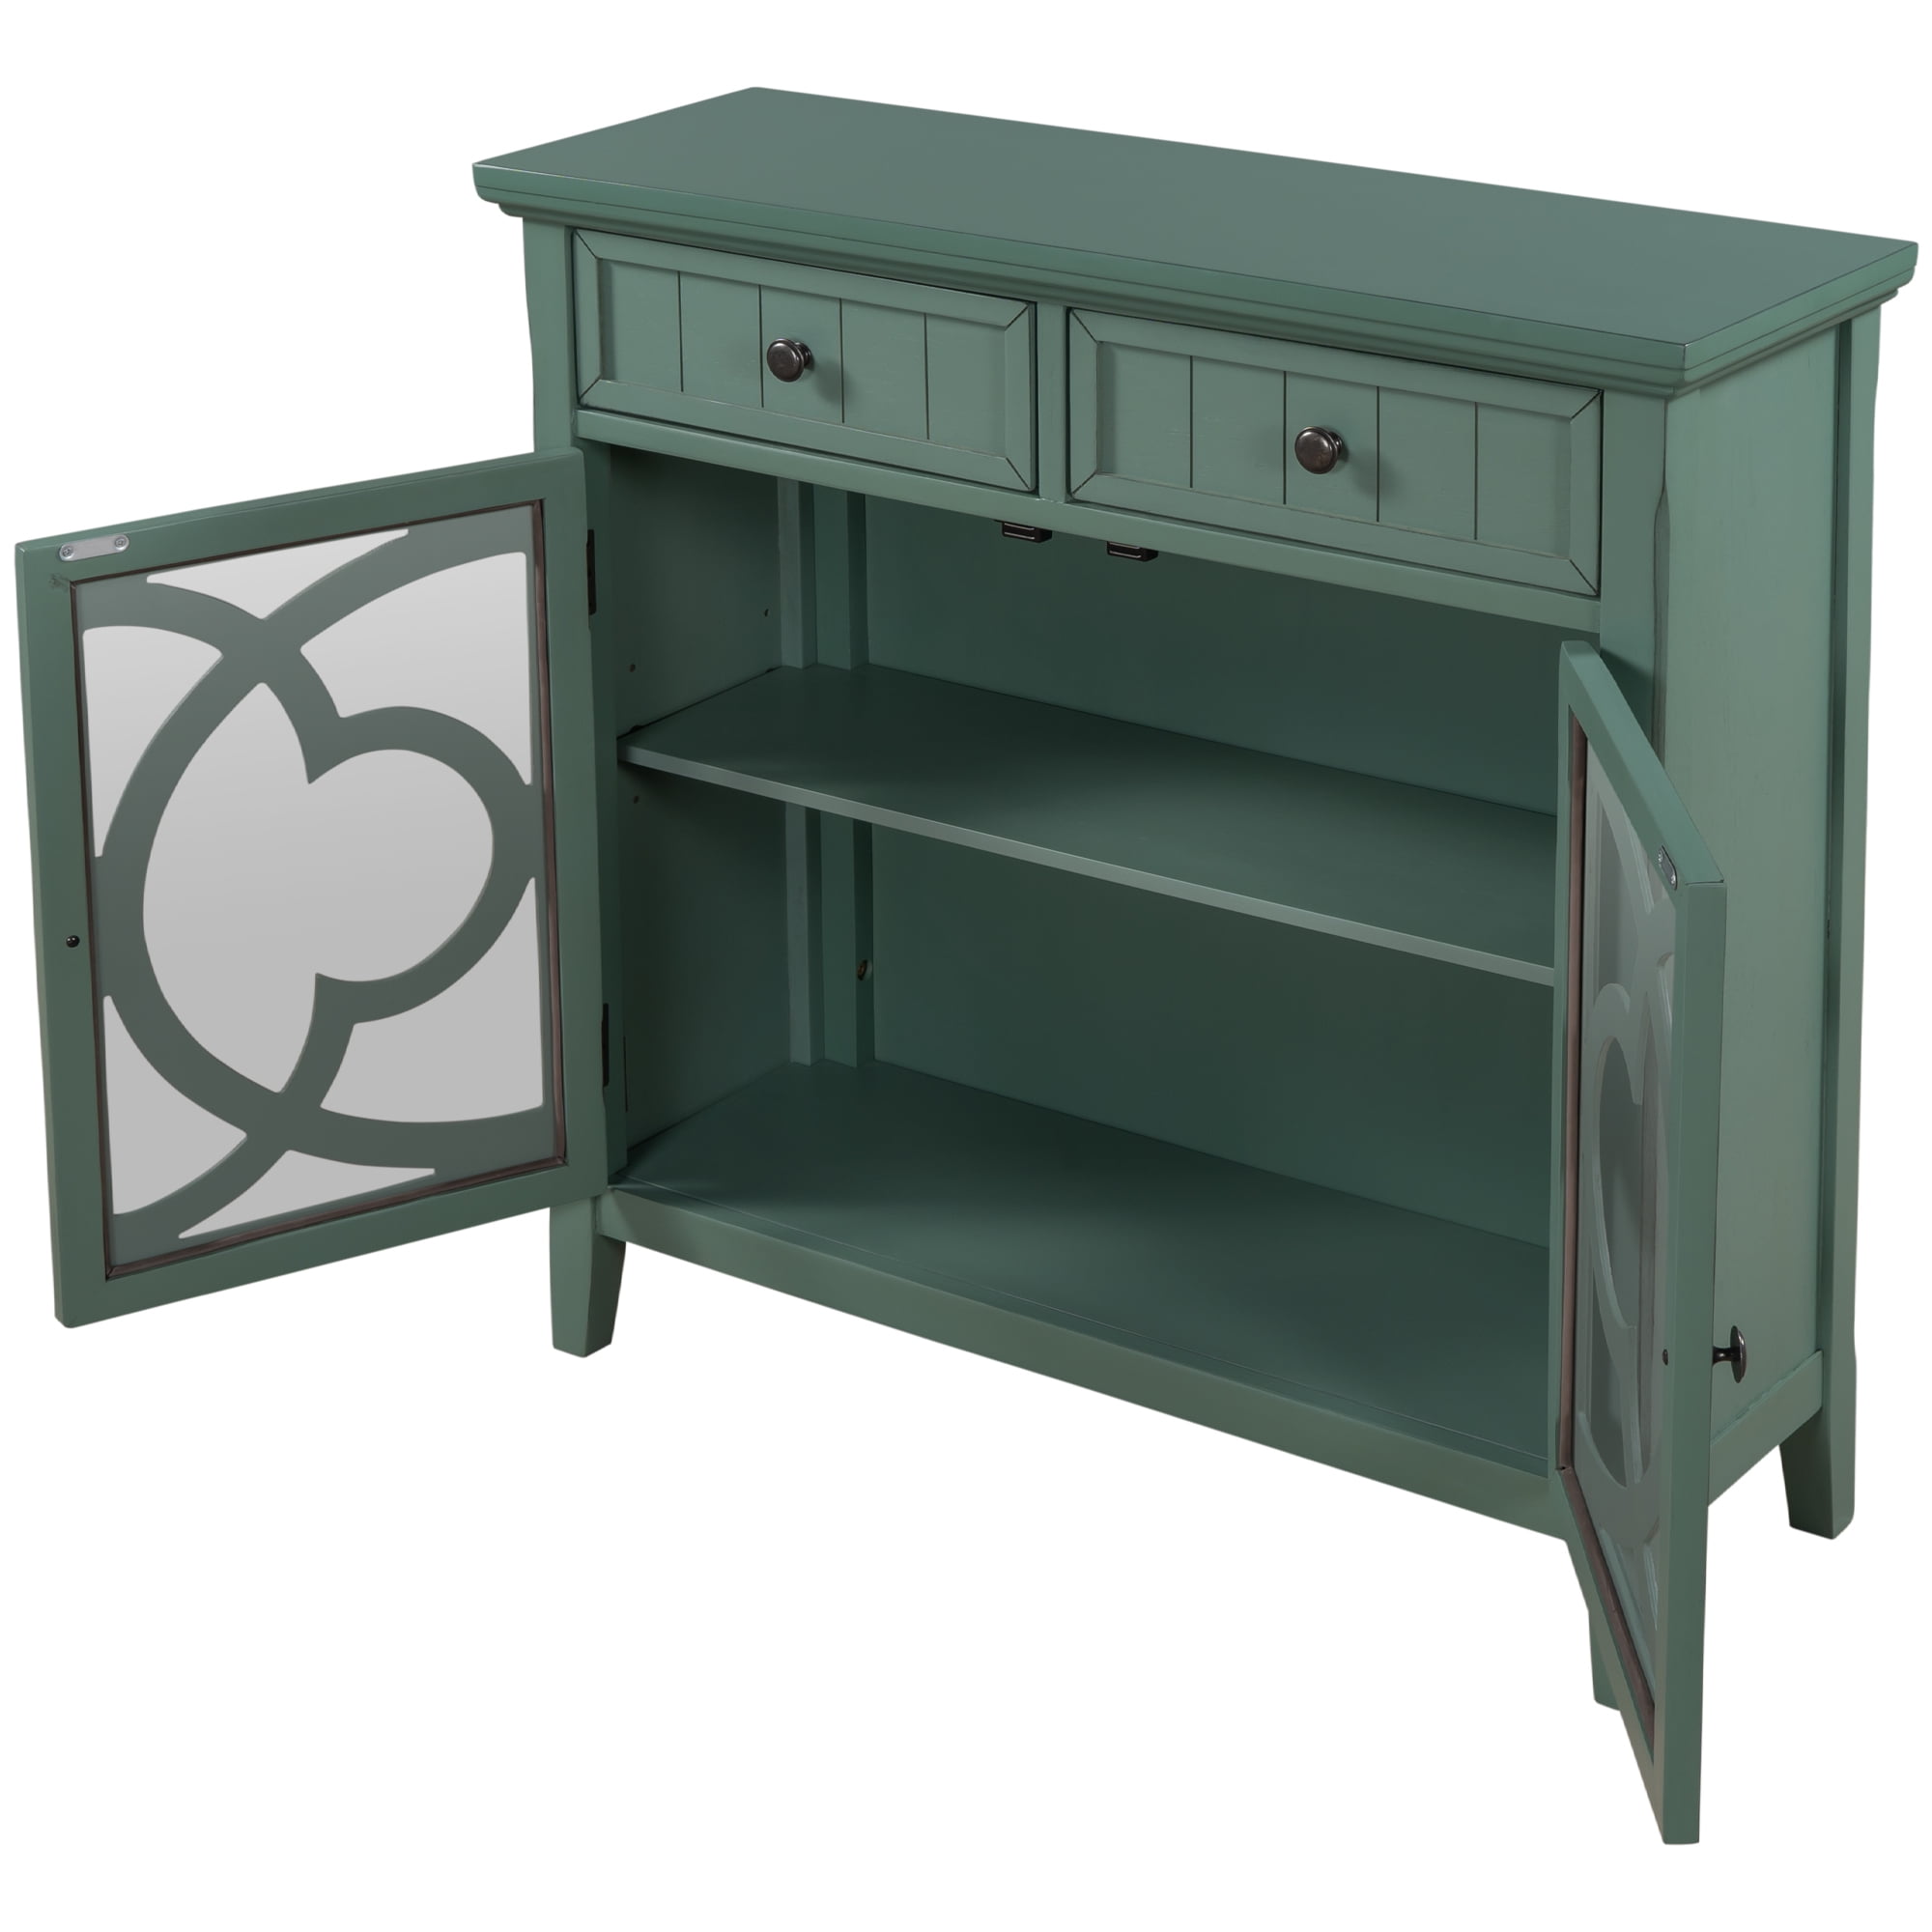 IDÅSEN High cabinet with drawer and doors, dark green, 173/4x673/4